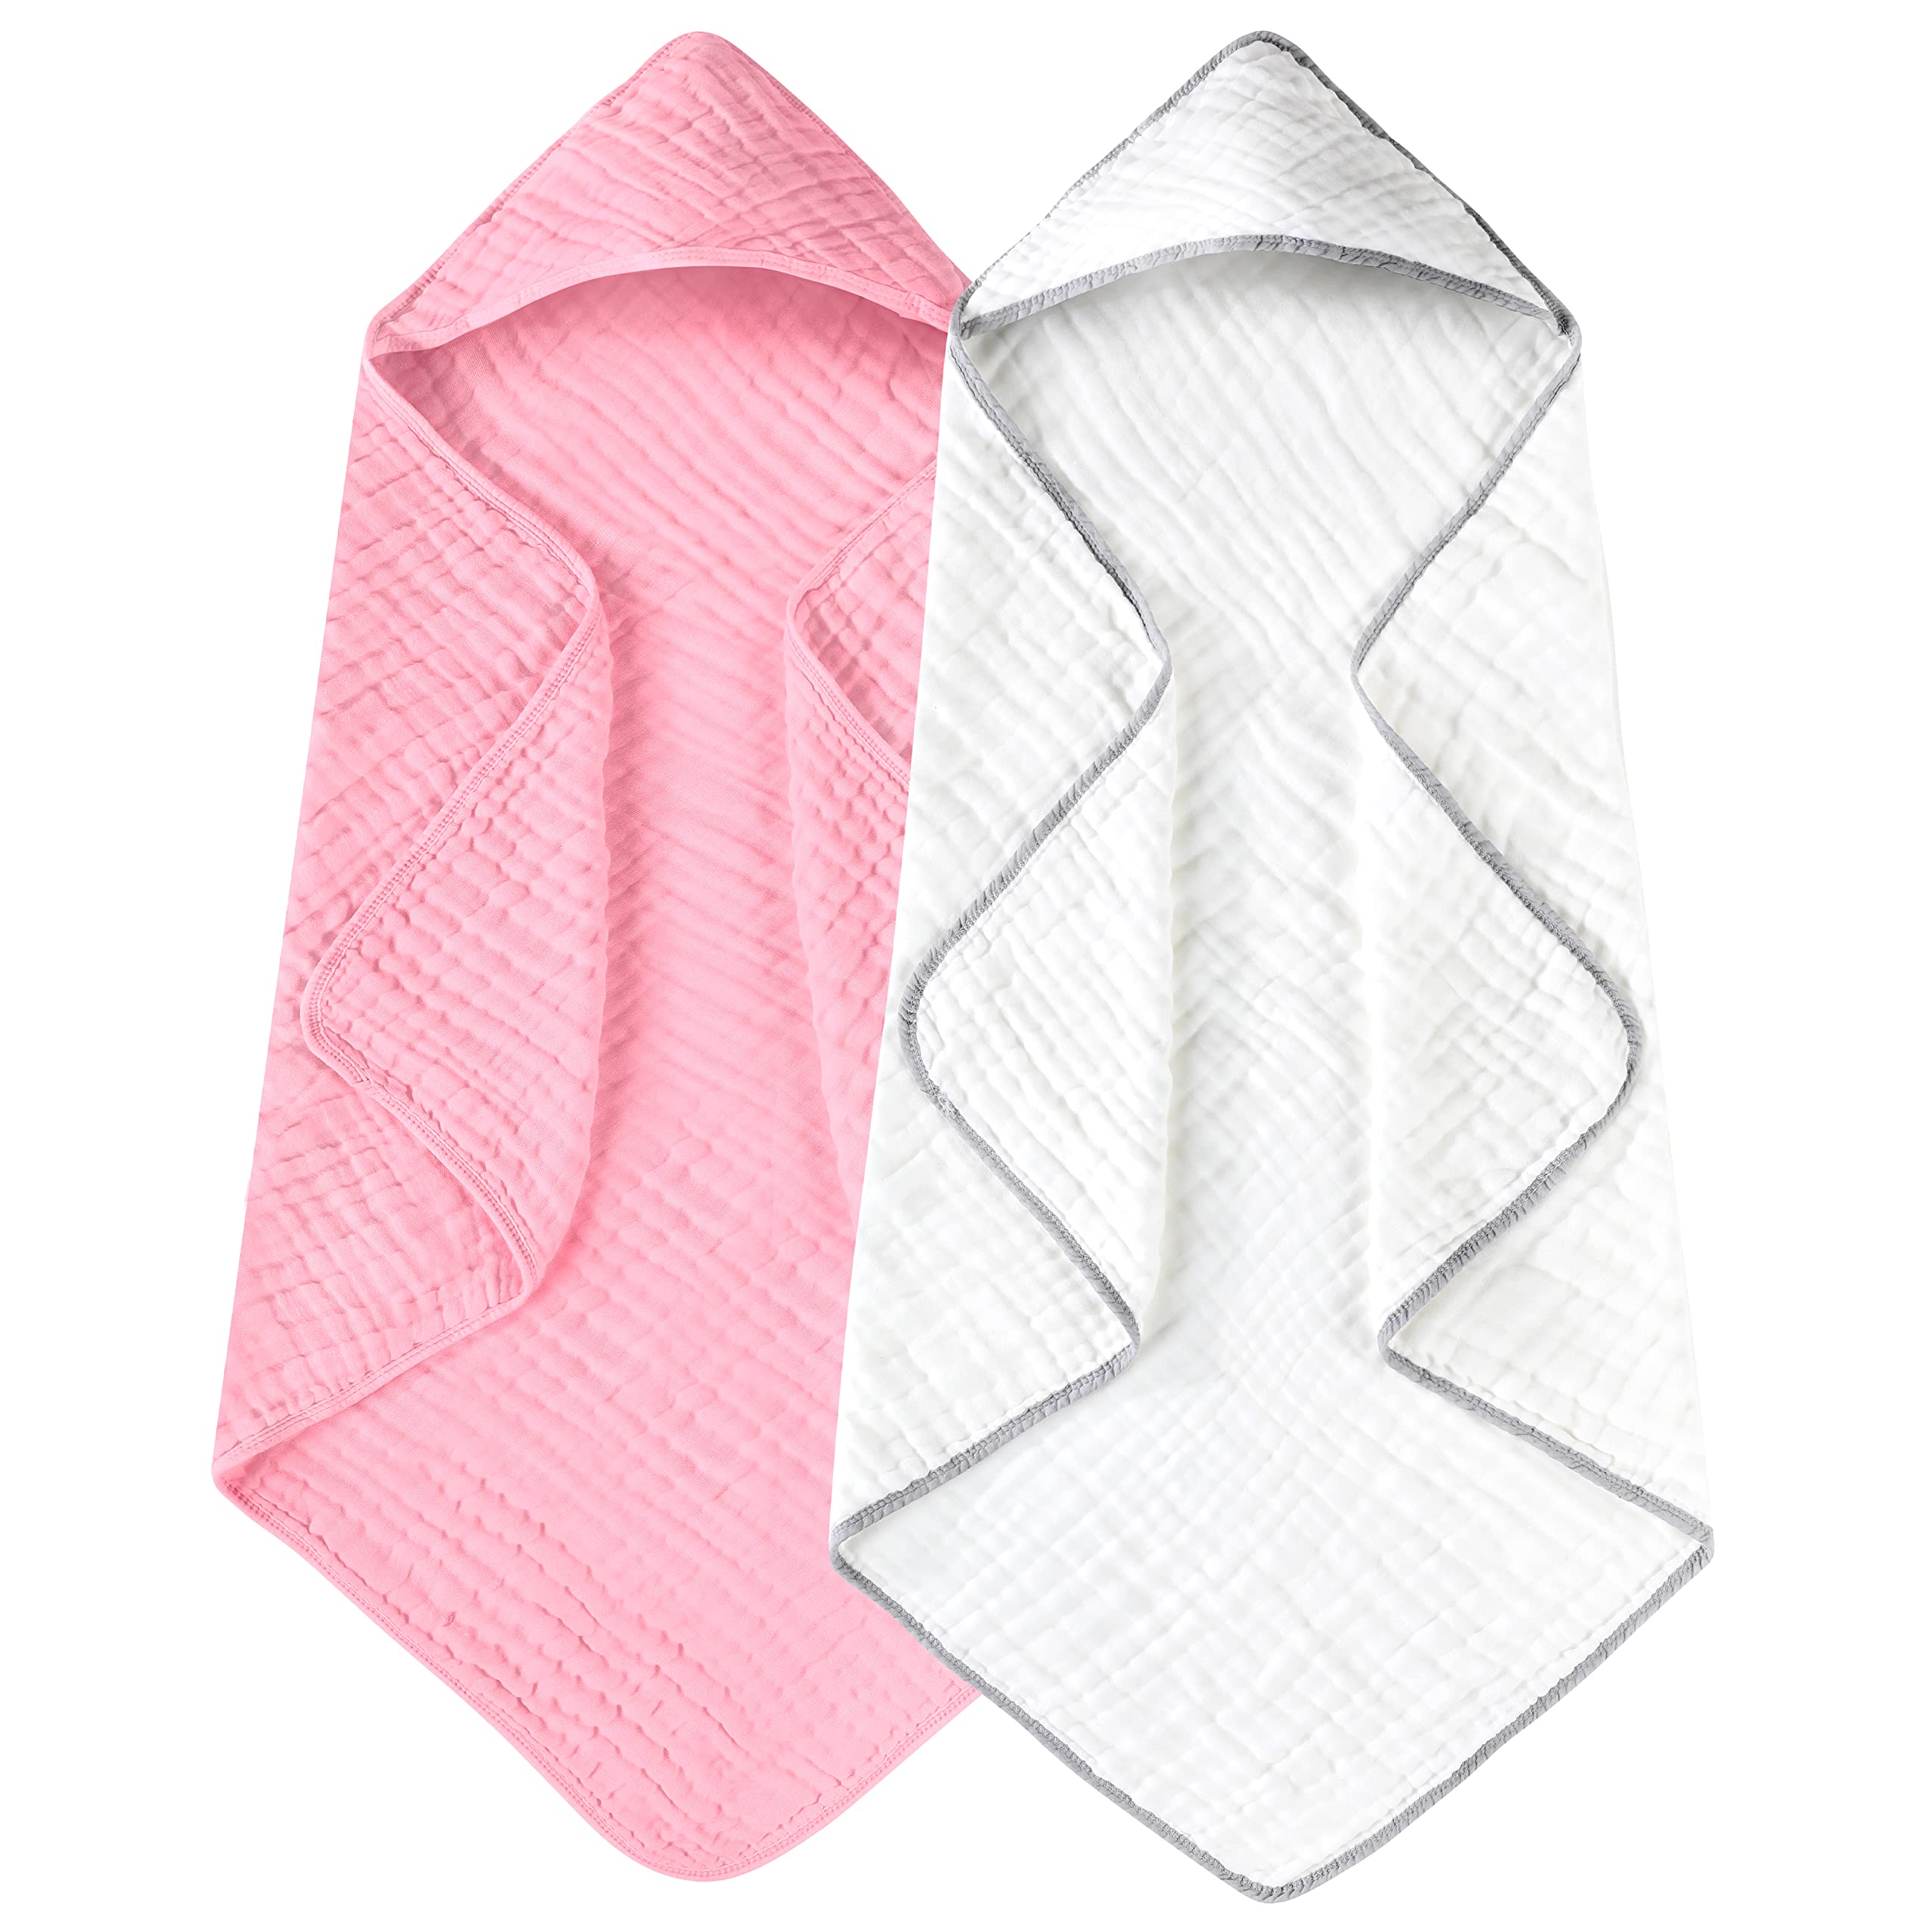 Yoofoss Hooded Baby Towels for Newborn 2 Pack 100% Muslin Cotton Baby